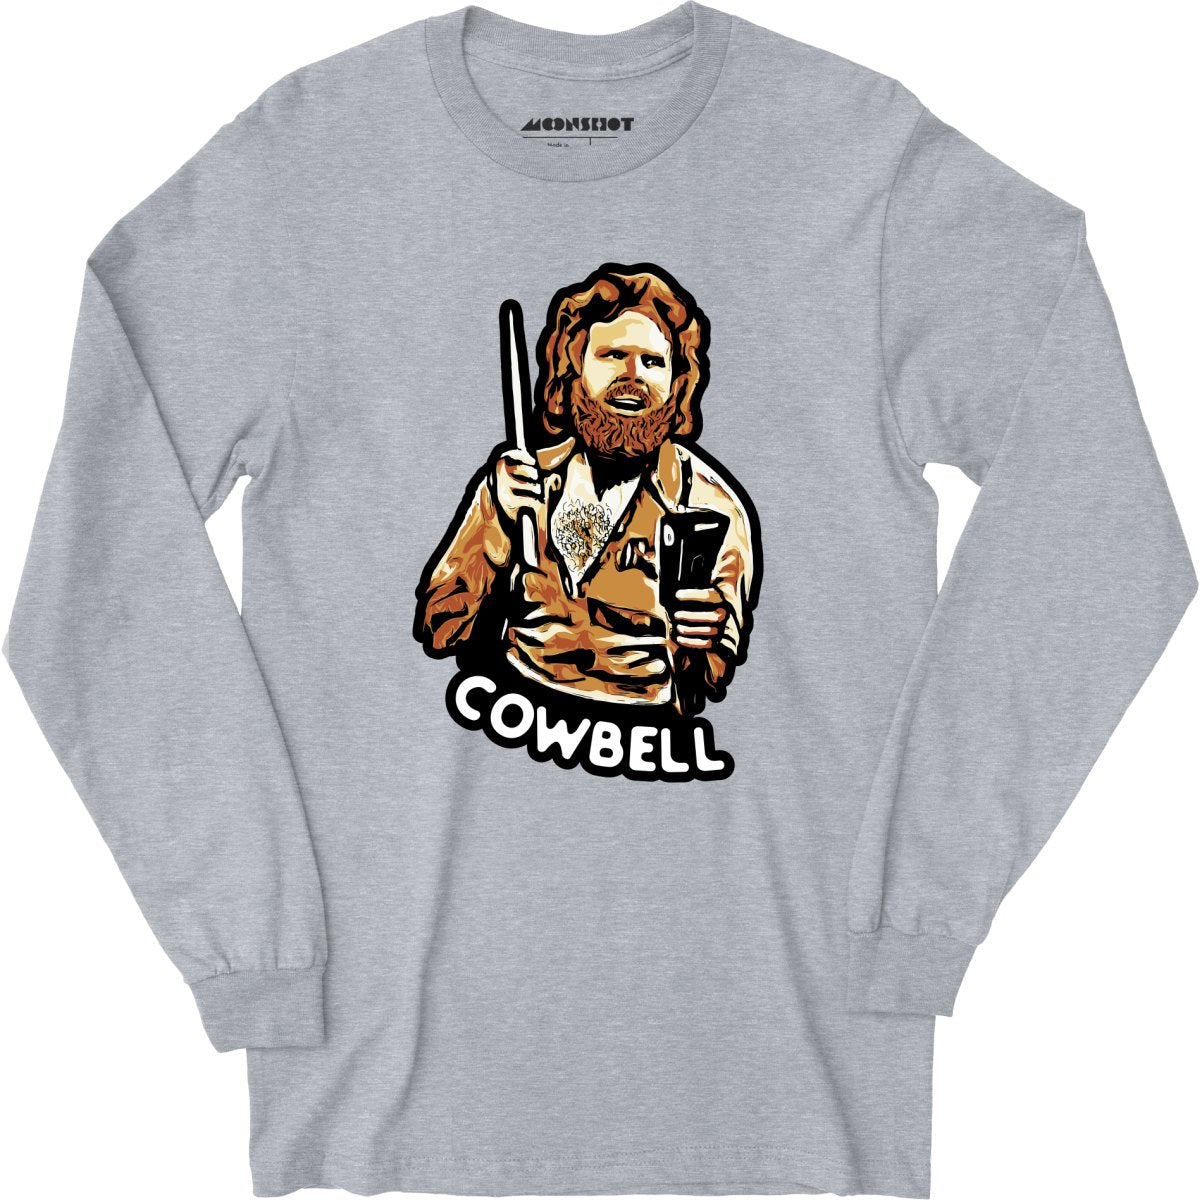 More Cowbell - Long Sleeve T-Shirt